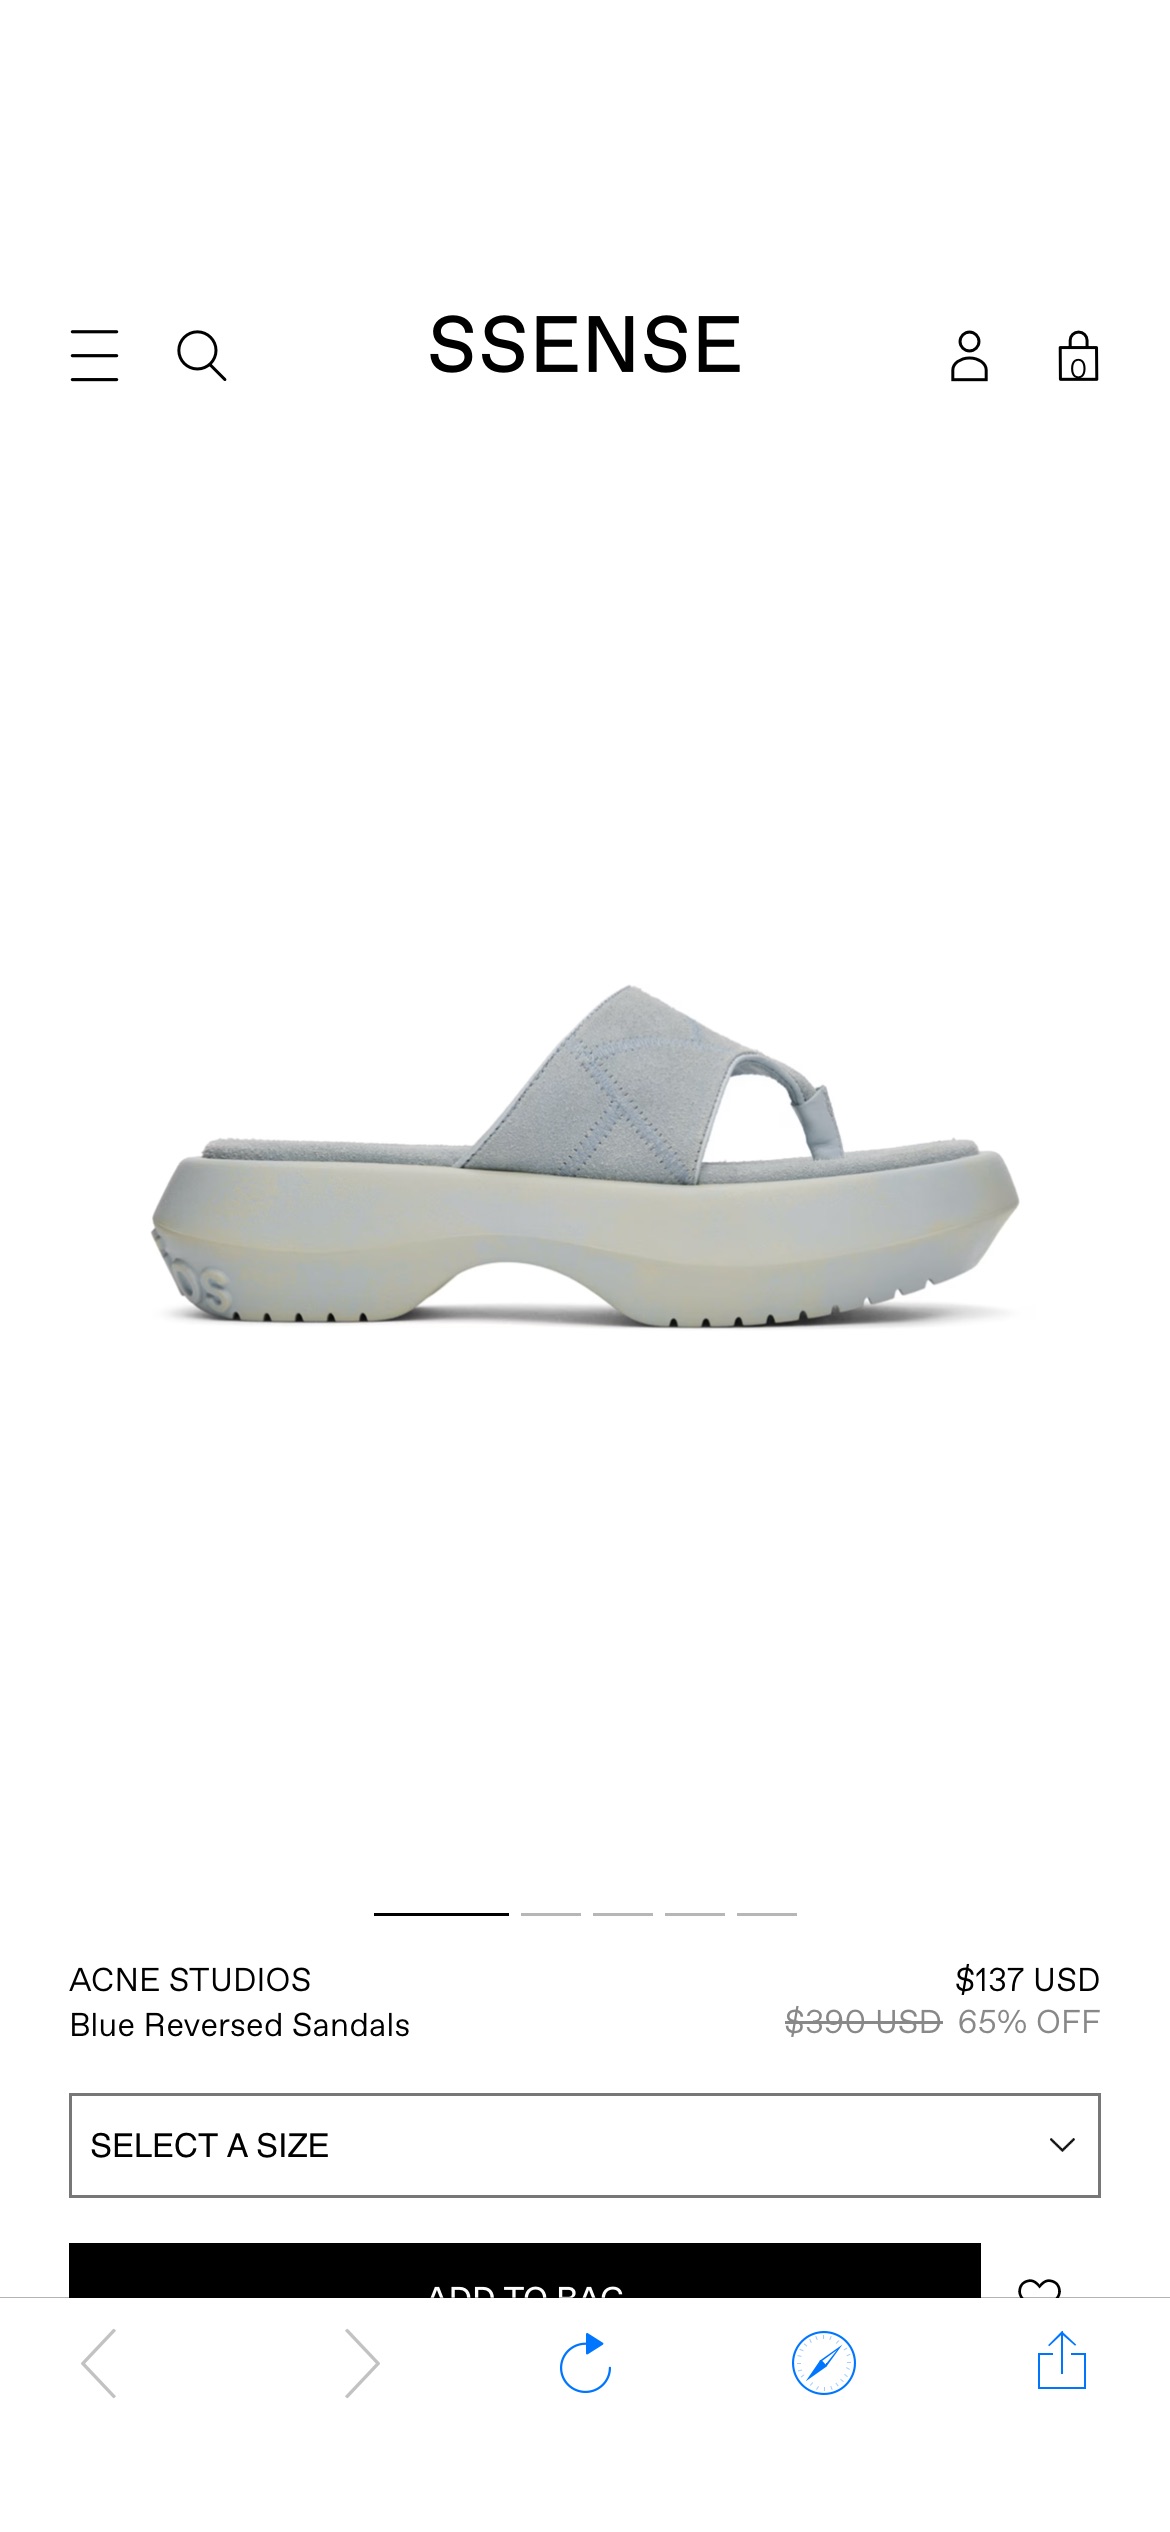 Blue Reversed Sandals by Acne Studios on Sale